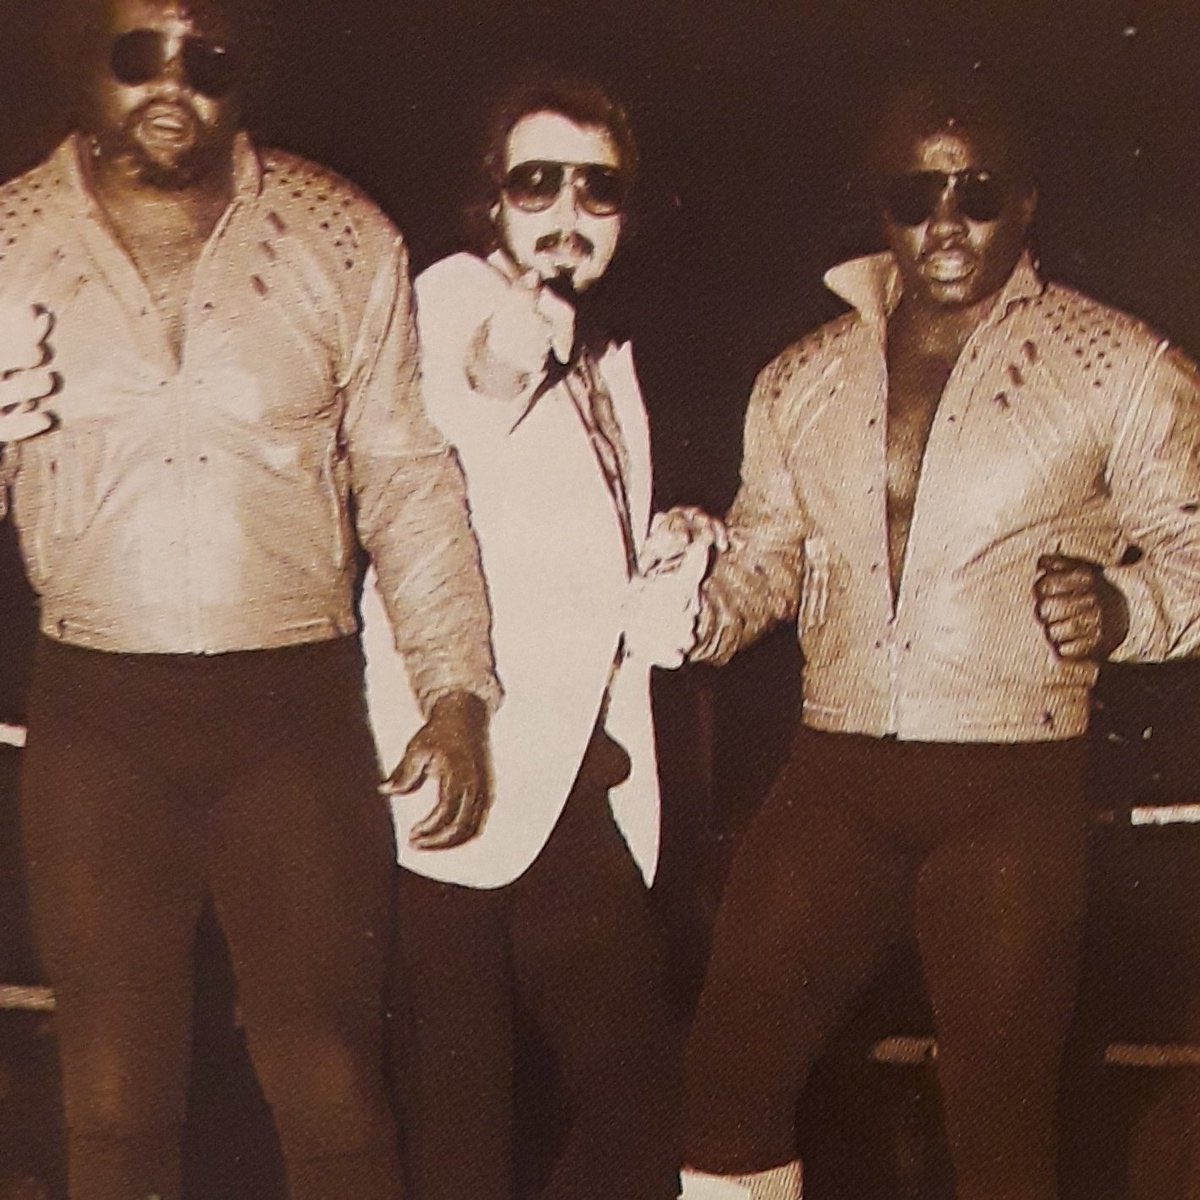 Hey @RealJimmyHart remember this?First Family stable in Memphis, Norvell Austin and Sweet Brown Sugar (Me) PYT Express tag team in 1983, some good times!